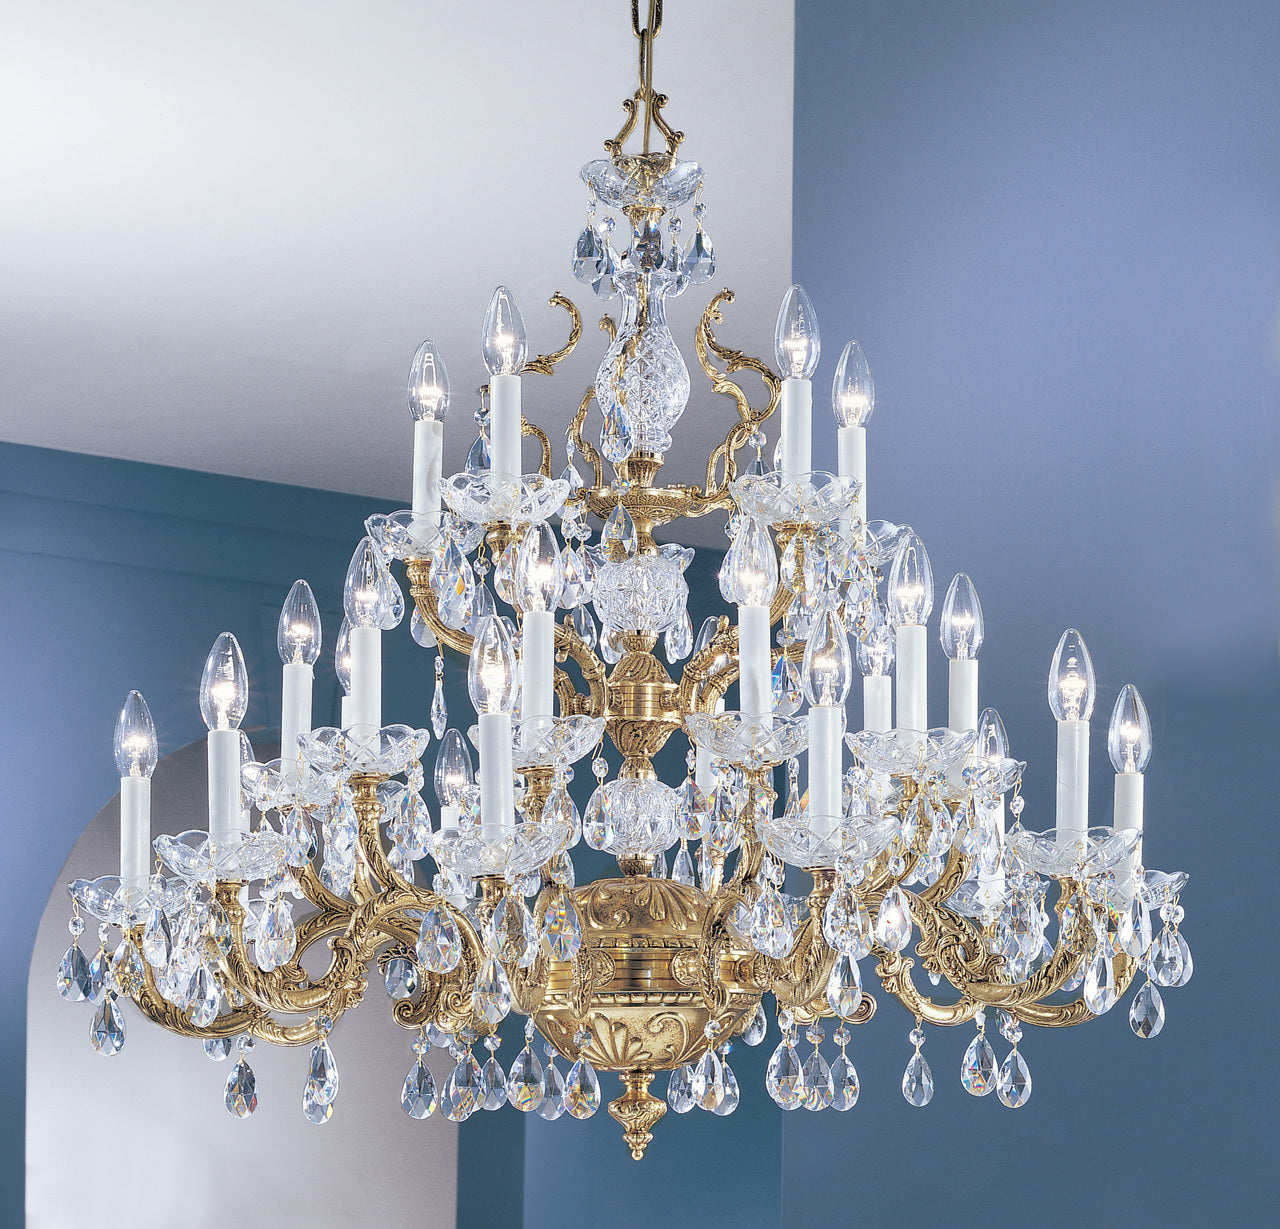 Classic Lighting 5535 RB PAM Madrid Crystal/Cast Brass Chandelier in Roman Bronze (Imported from Spain)